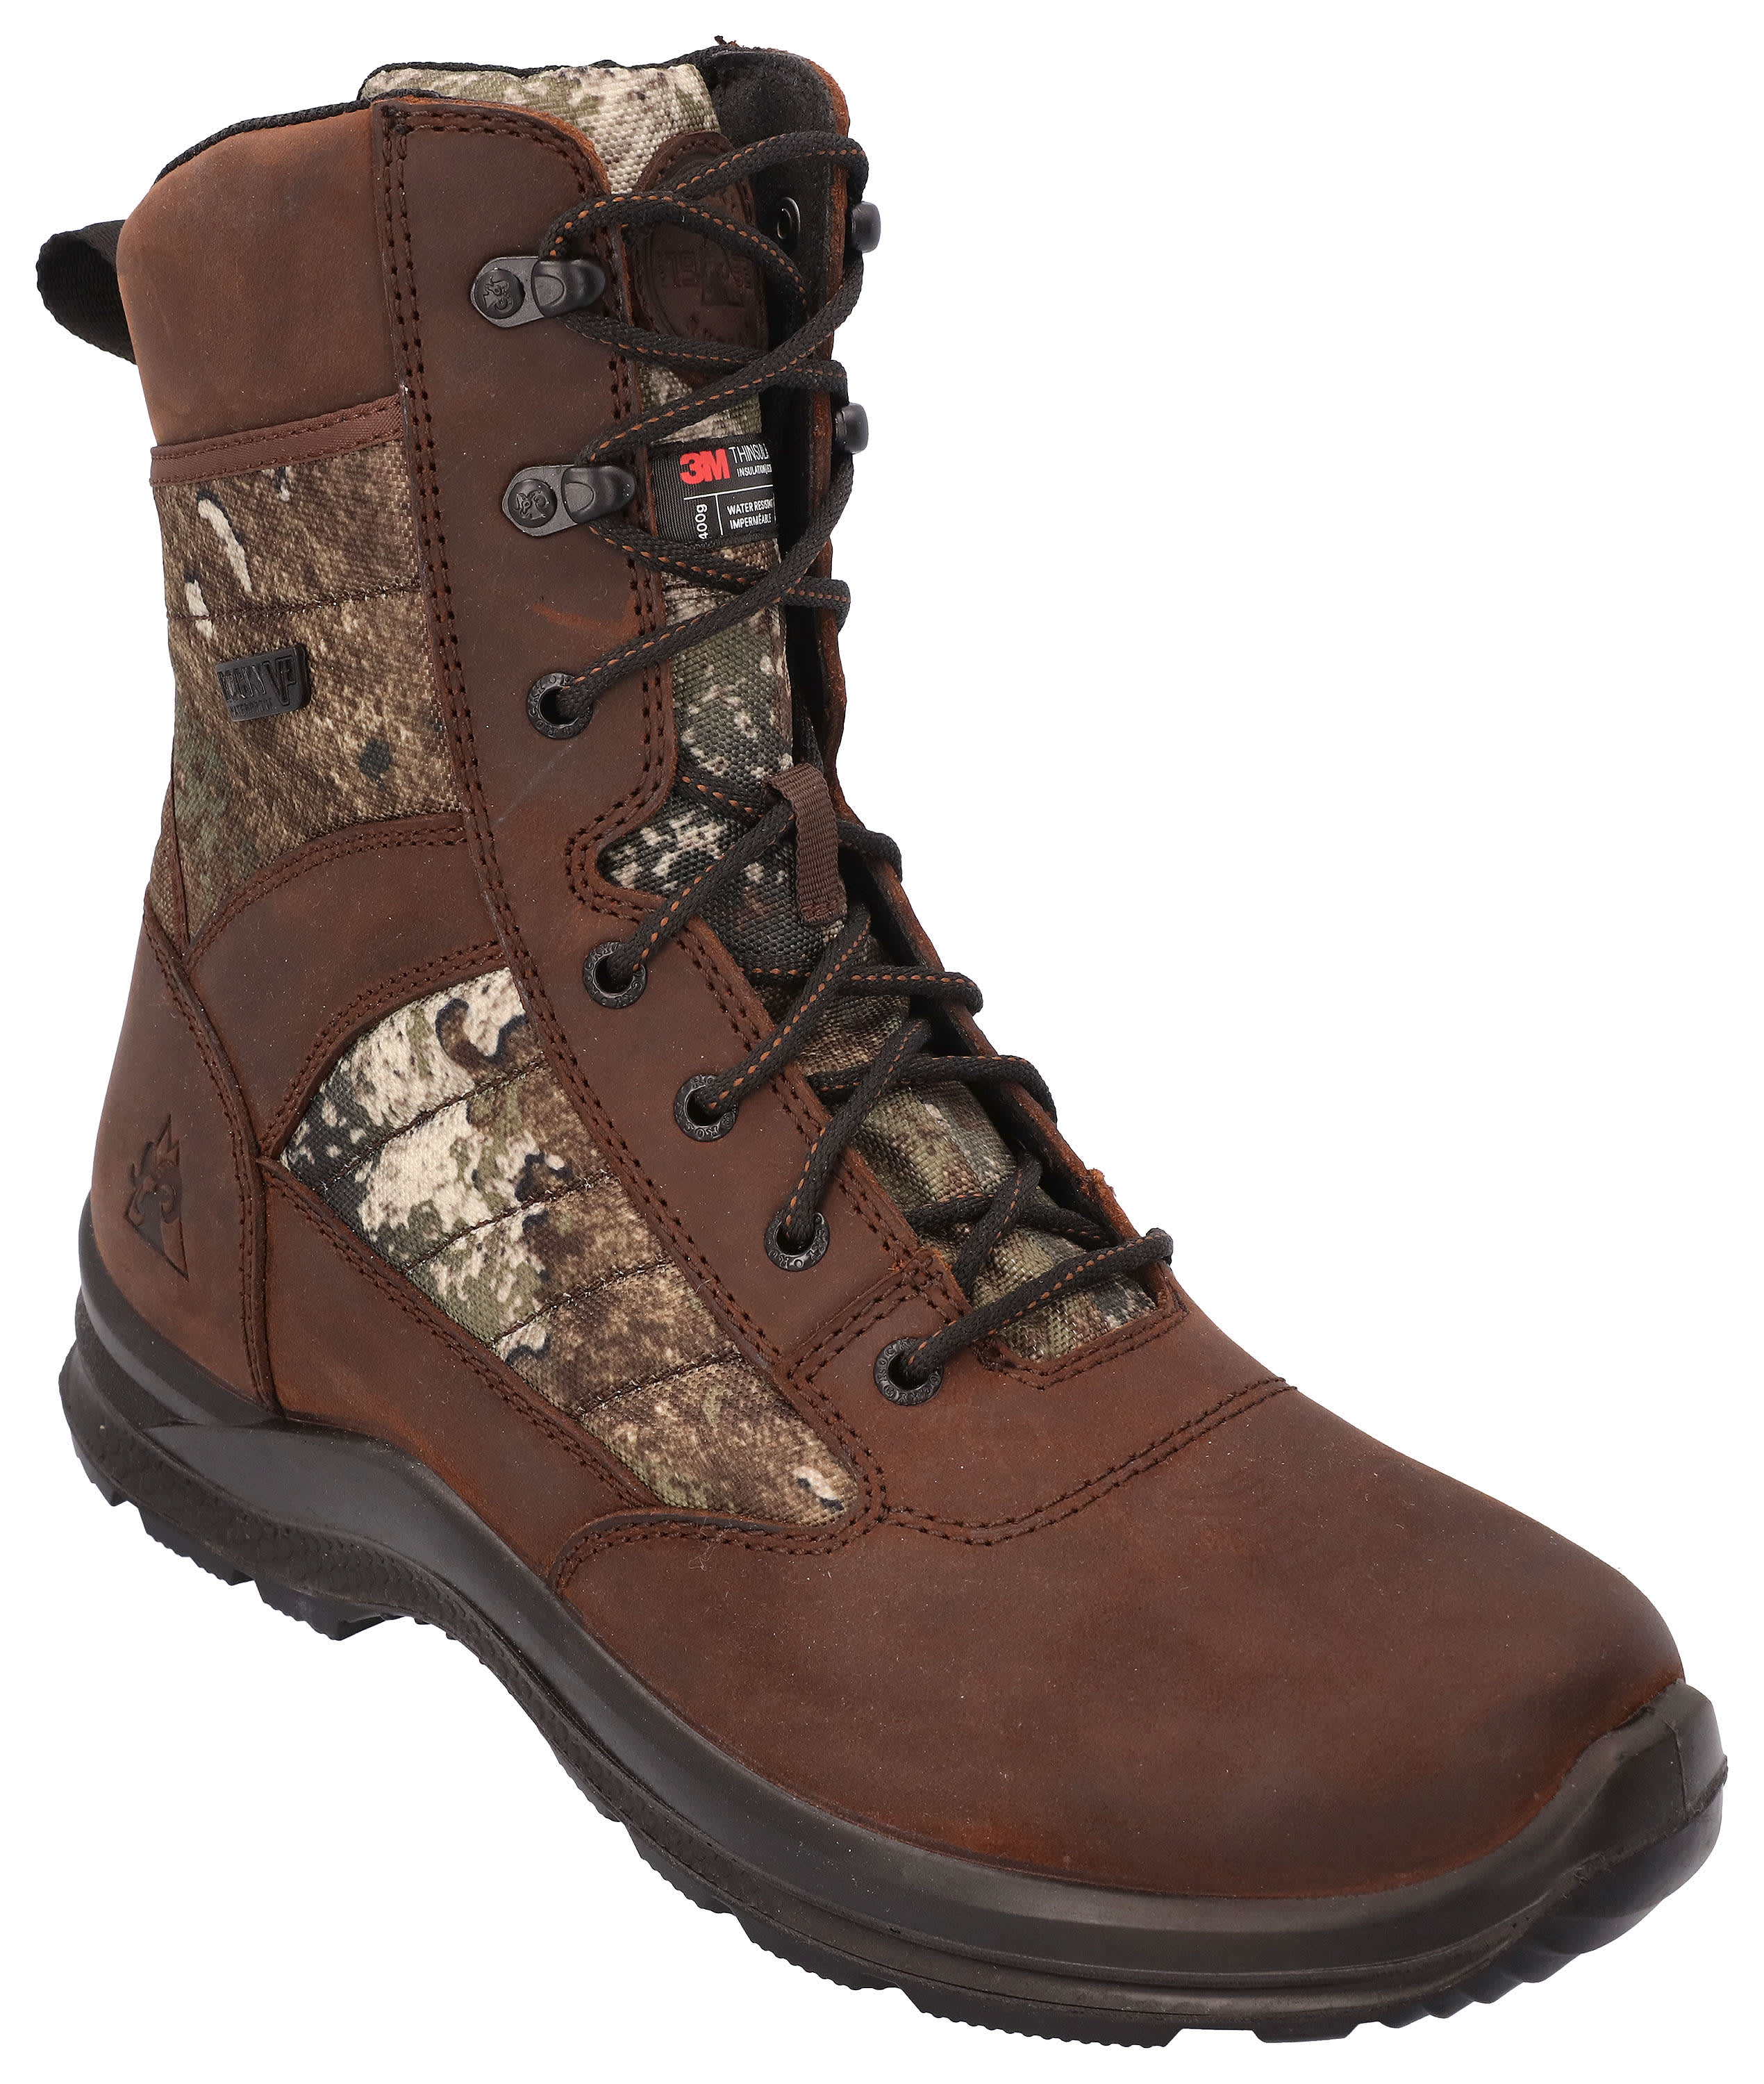 ROCKY® Wildcat Insulated Waterproof Hunting Boots for Men